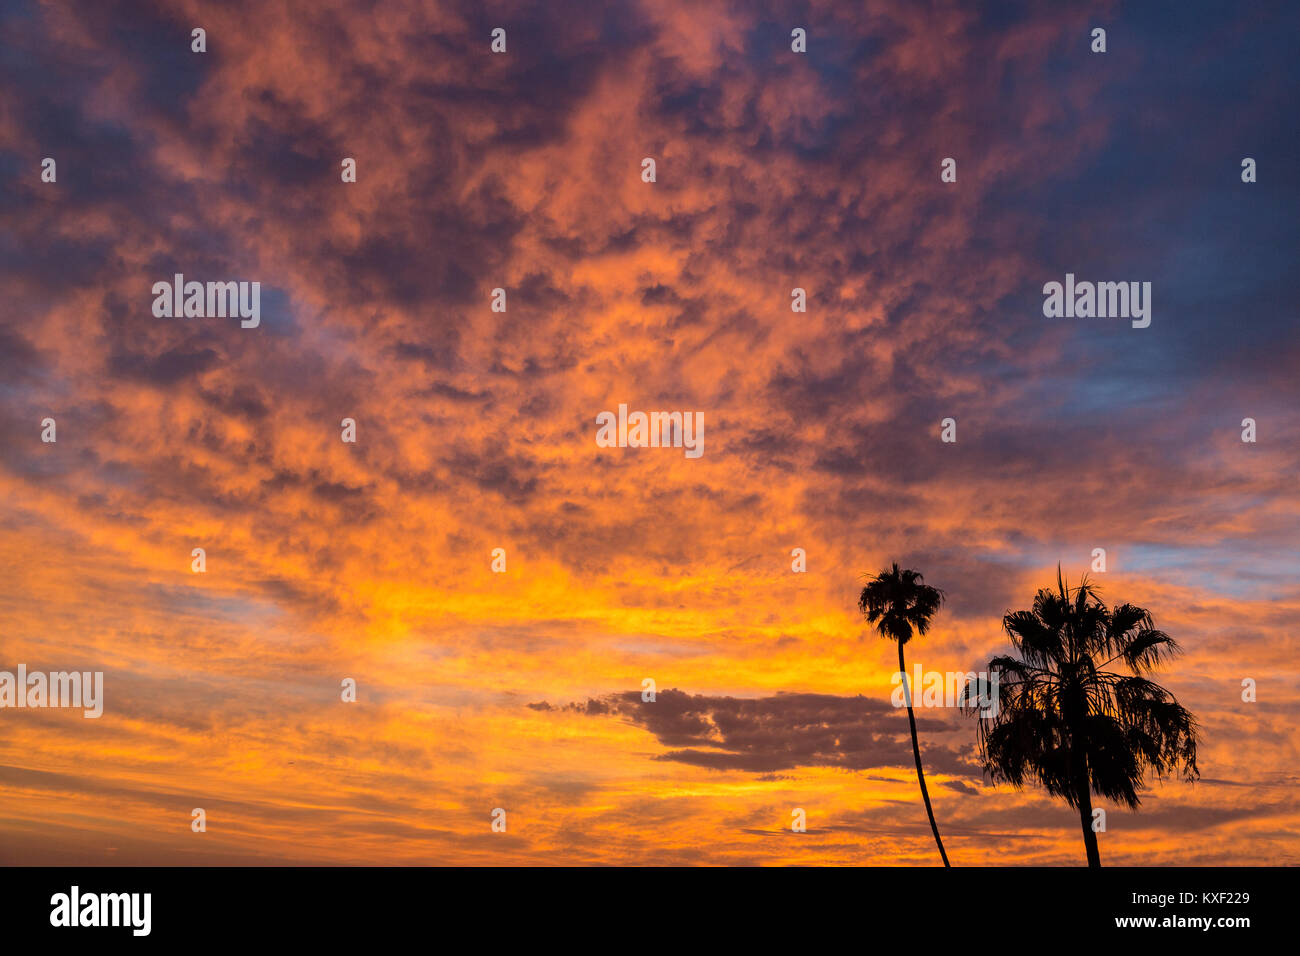 Palm trees are silhouetted against vibrant post-sunset clouds in Playa Del Rey, California. Stock Photo